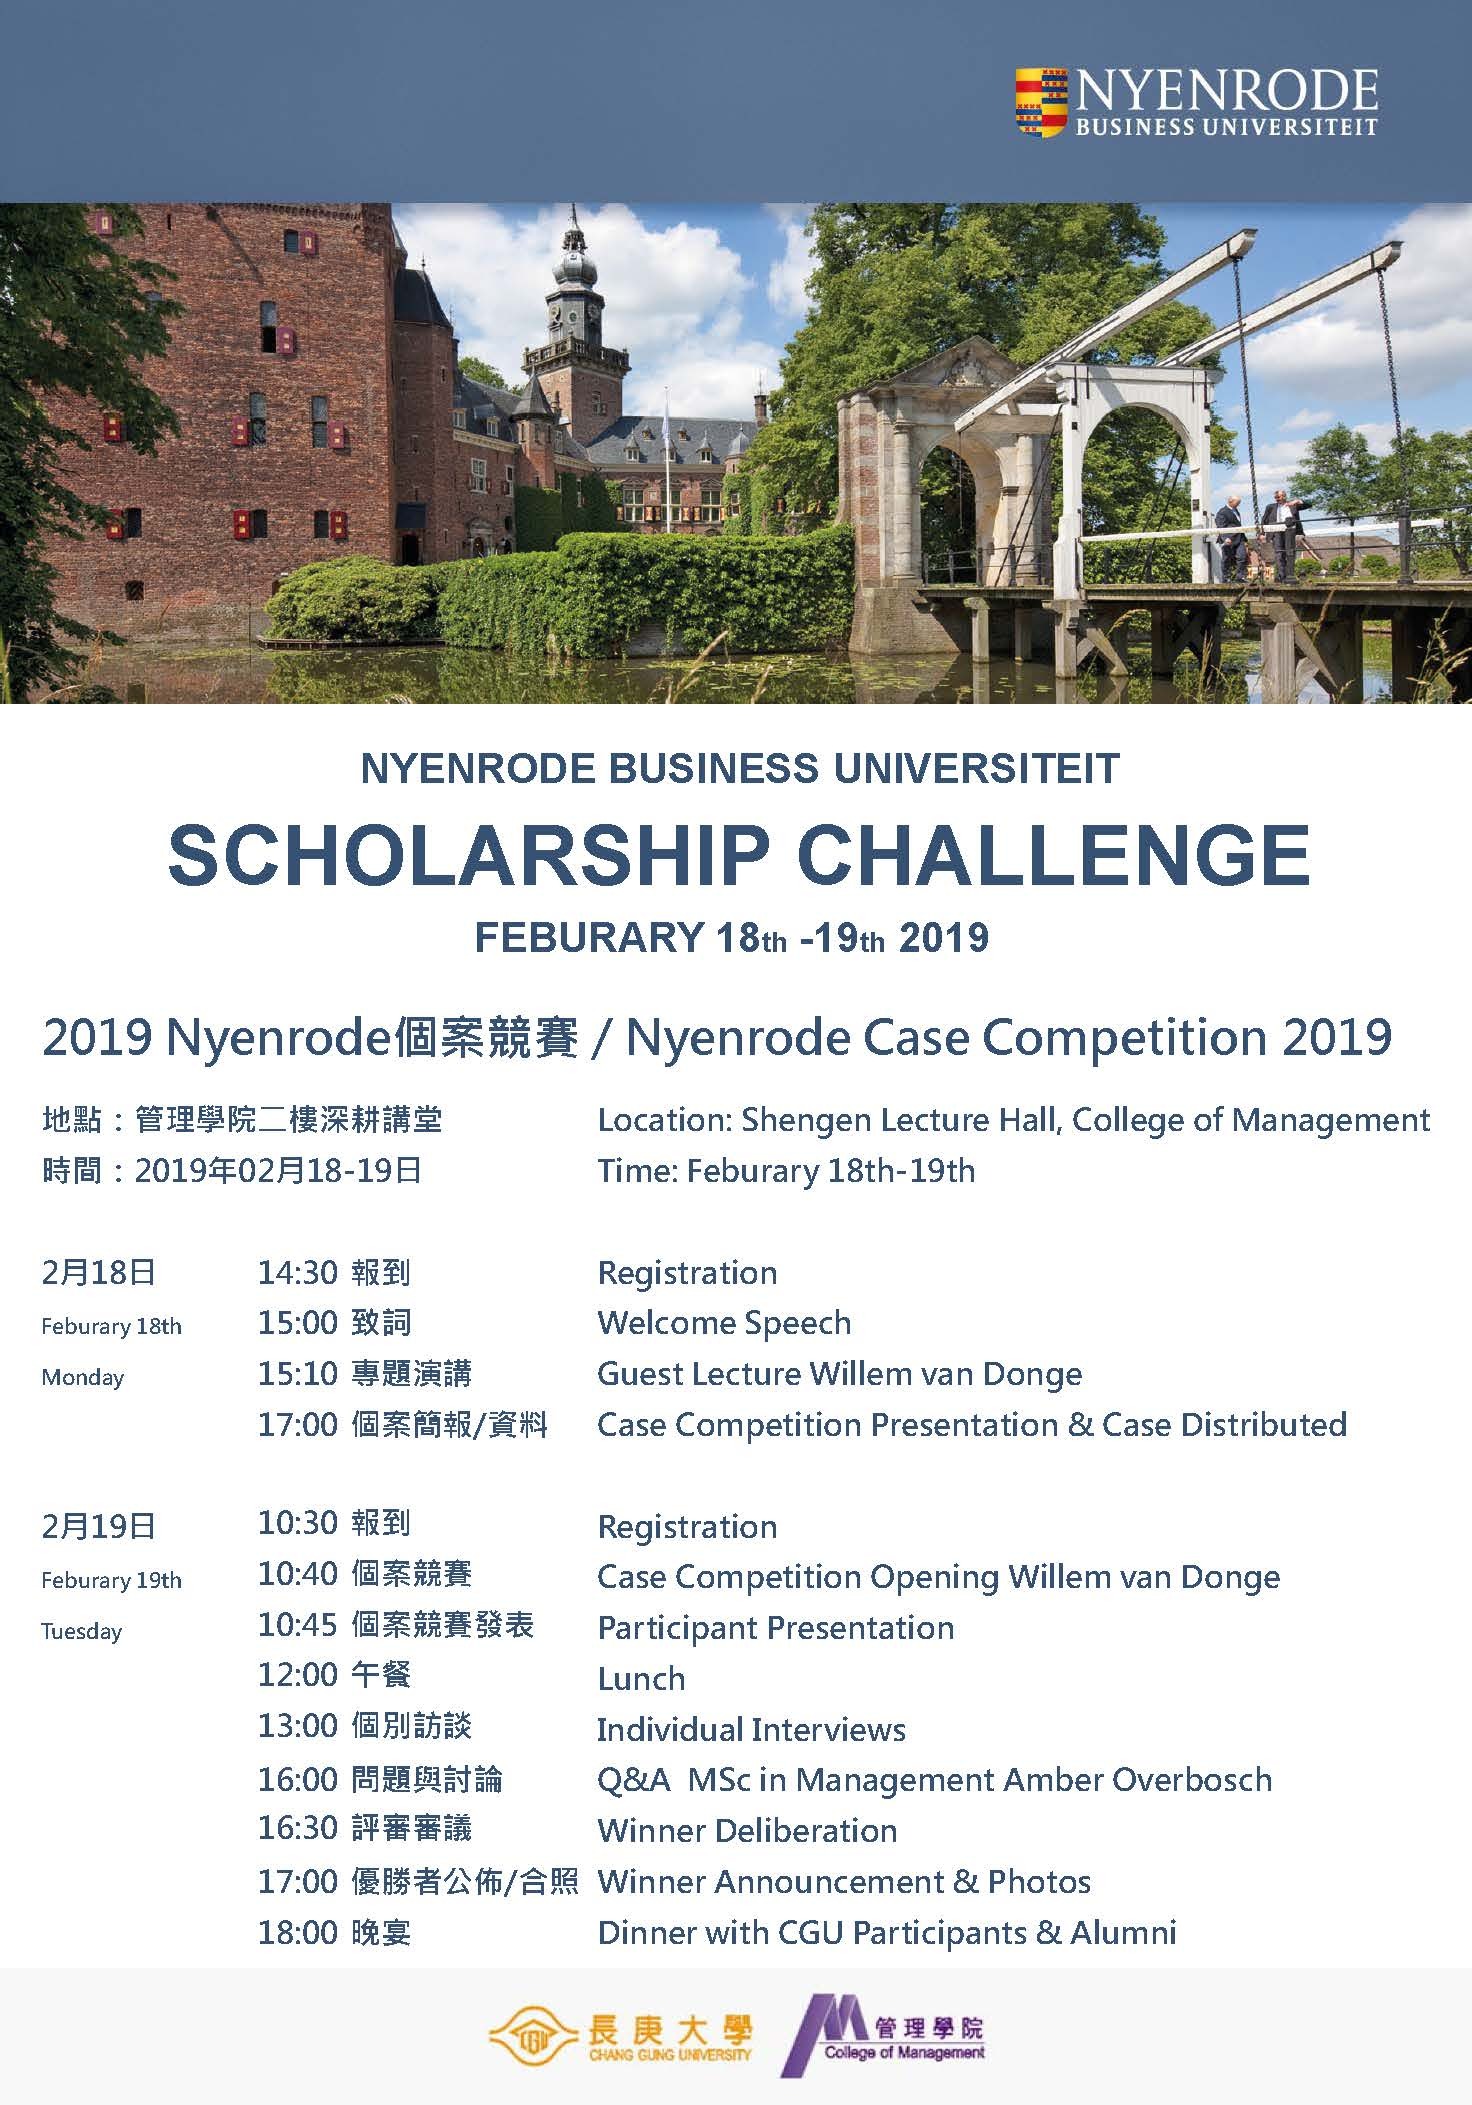 Nyenrode Case Competition 2019 schedule